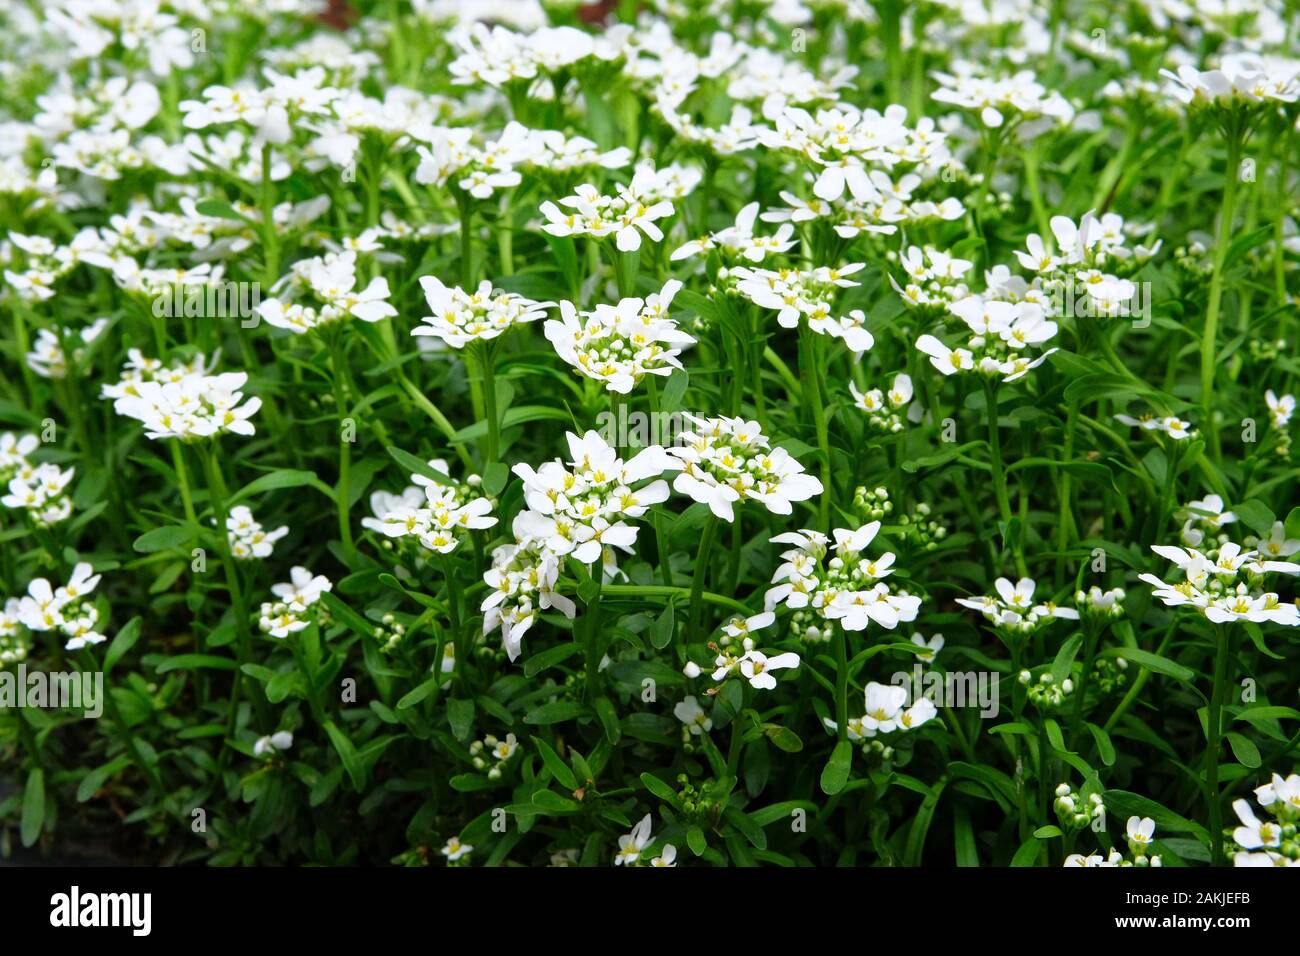 Alyssum. Medicinal plant used as a groundcover in landscape design. White flowers alyssum on flowerbed in summer garden. Stock Photo